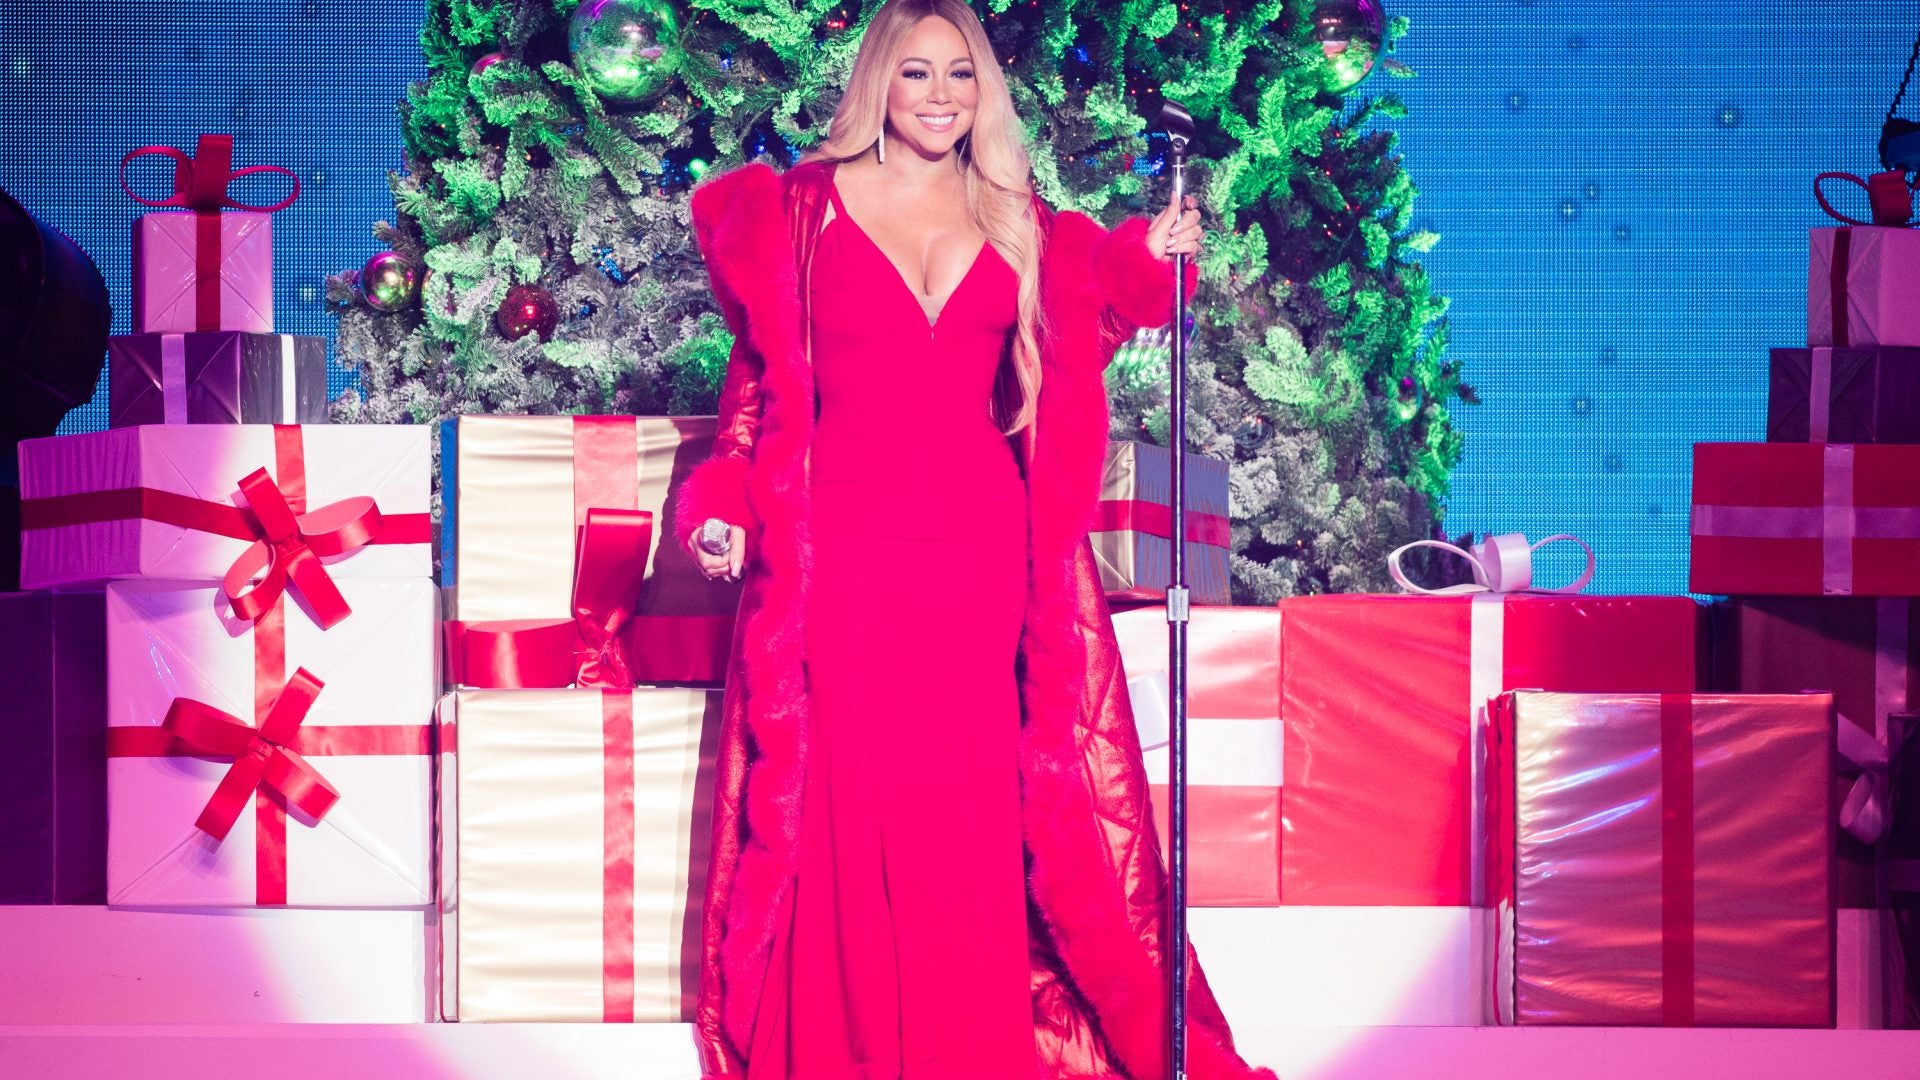 Mariah Carey's 'All I Want For Christmas Is You' Is Most-Streamed Holiday Song Of All Time